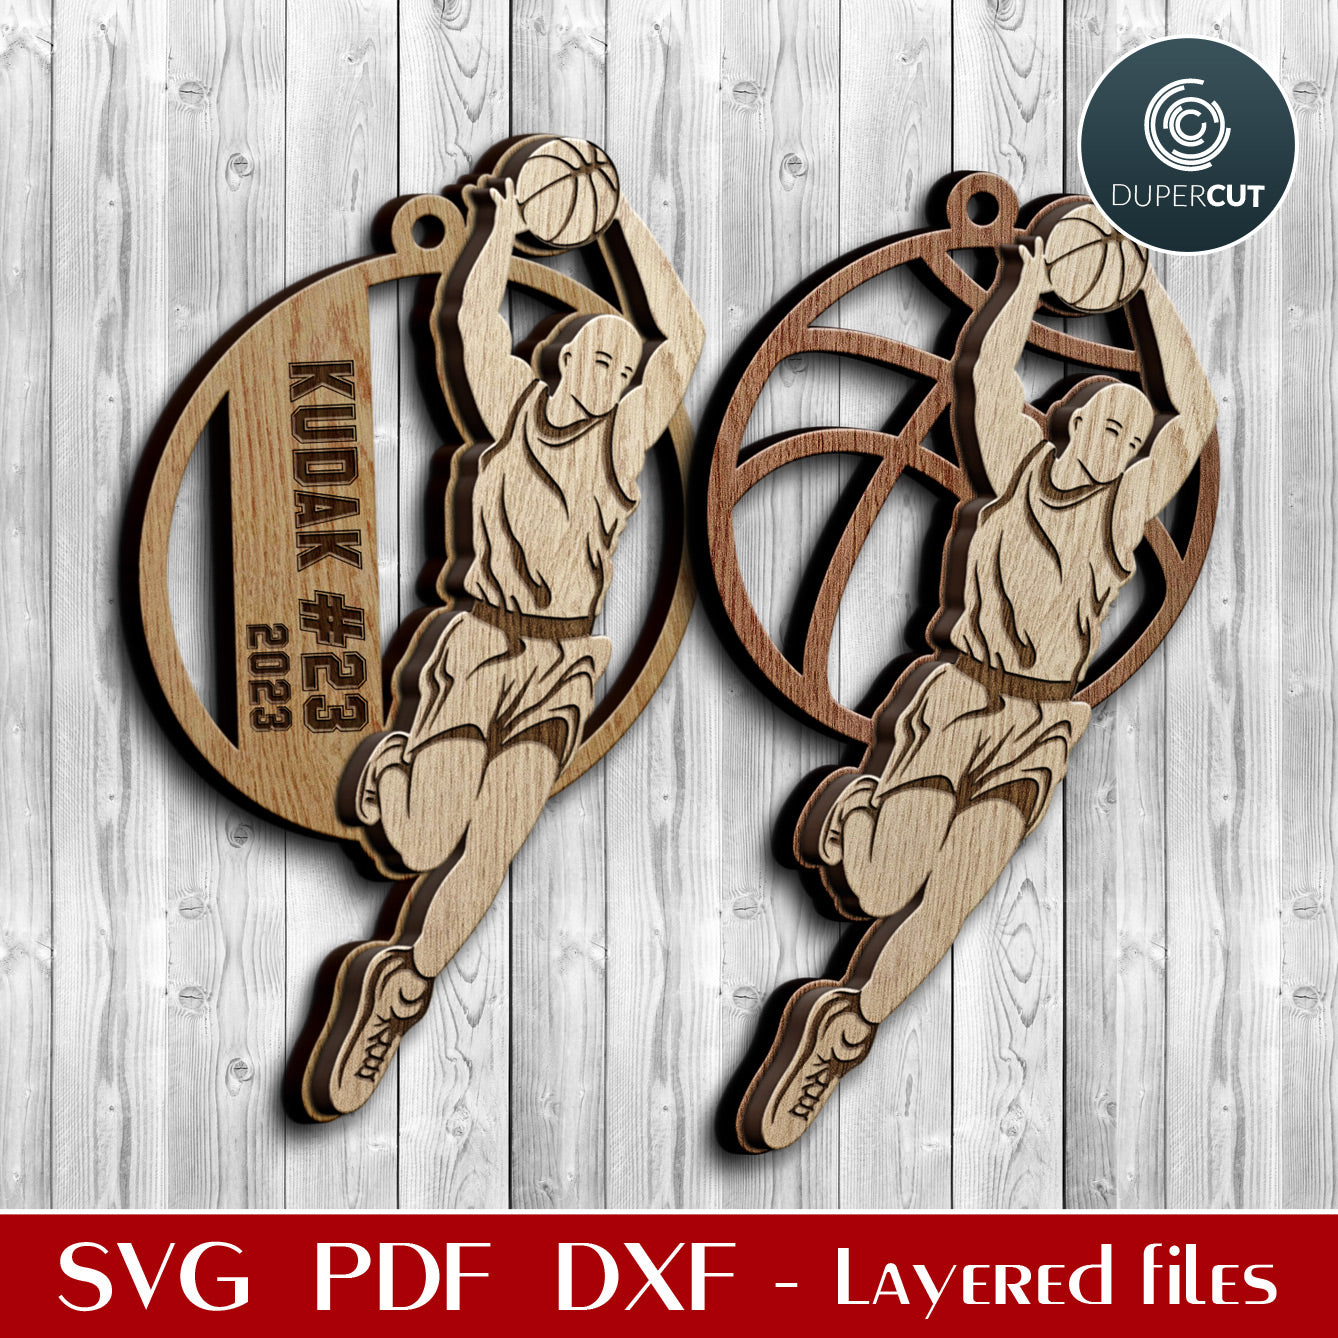 Basketball player DIY personalized ornament layered cut files - SVG vector for laser engraving Glowforge, Cricut, CNC plasma by www.DuperCut.com